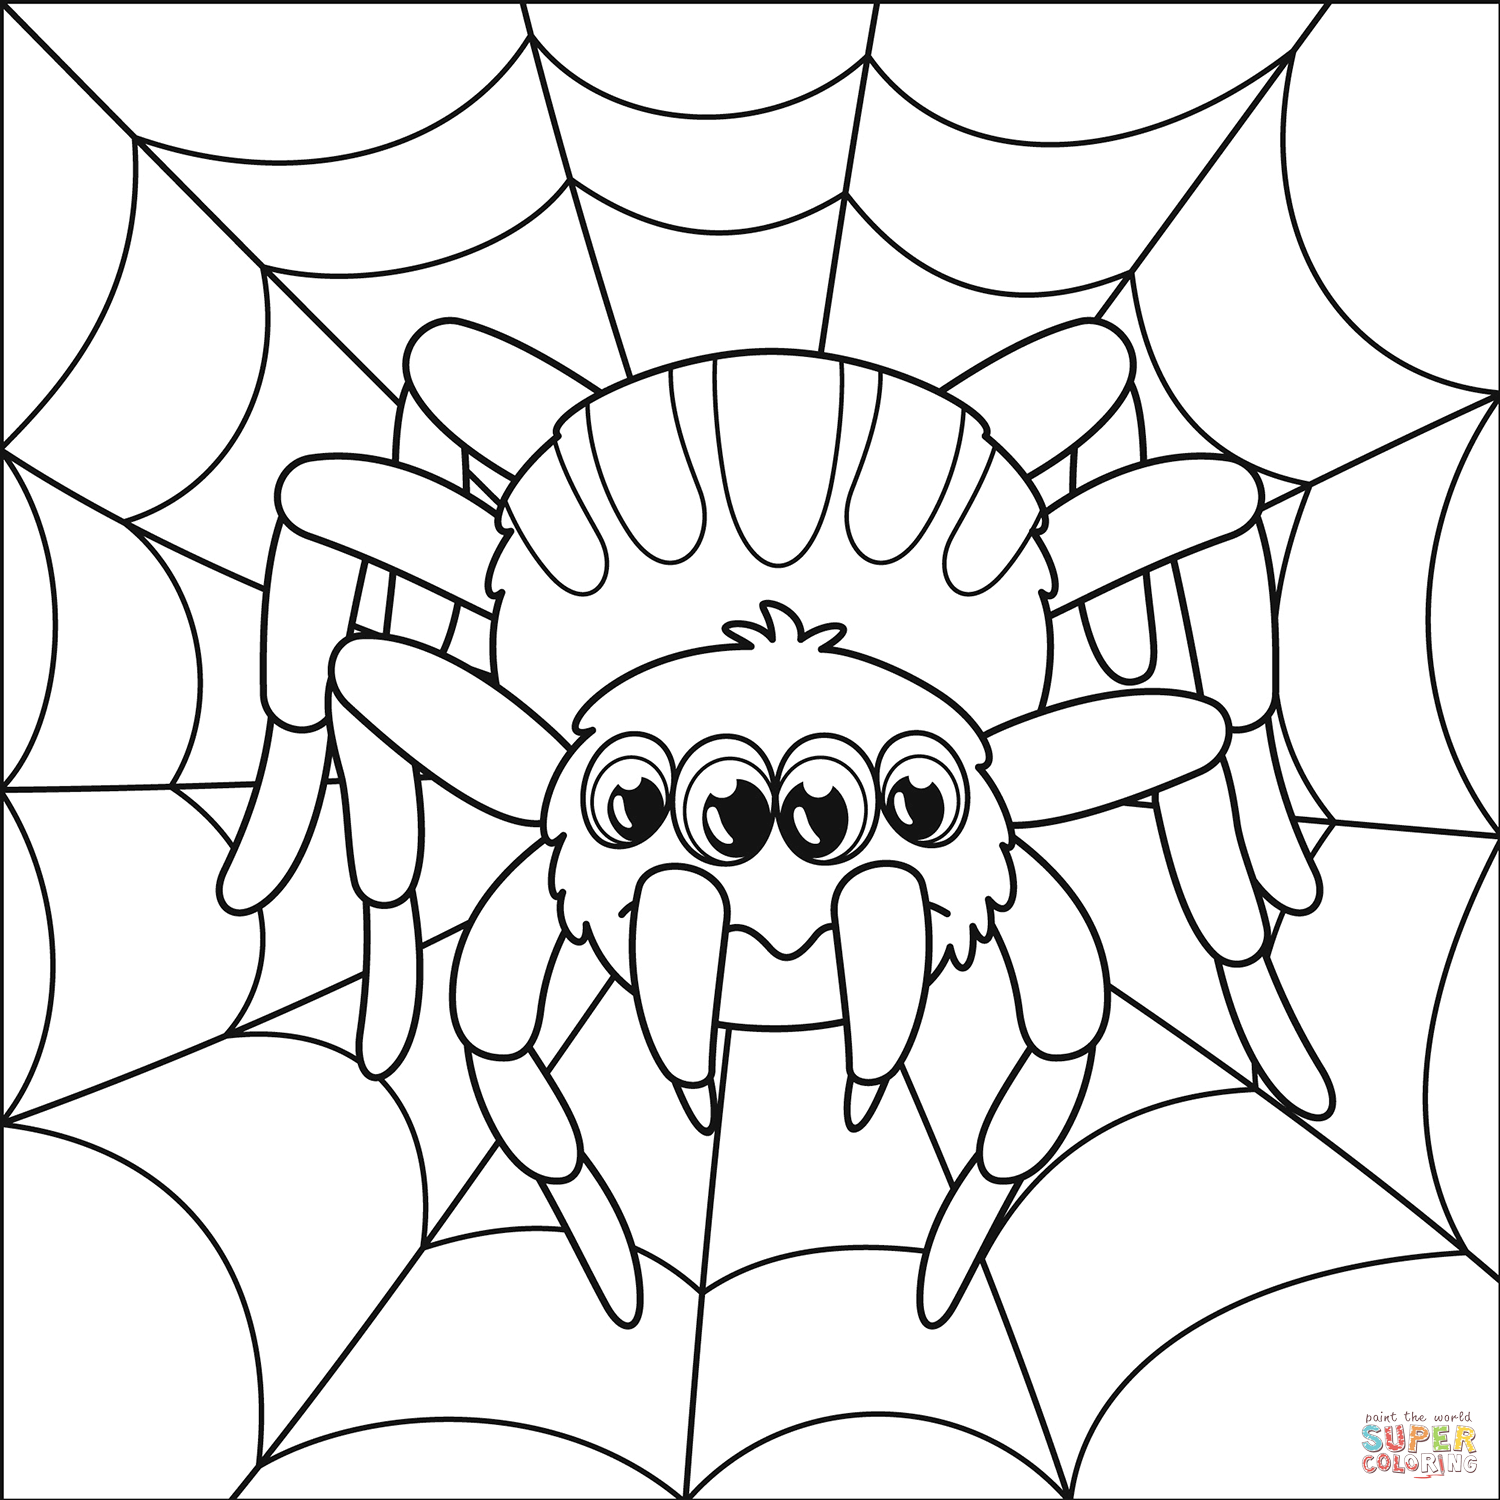 Spider coloring page free printable coloring pages